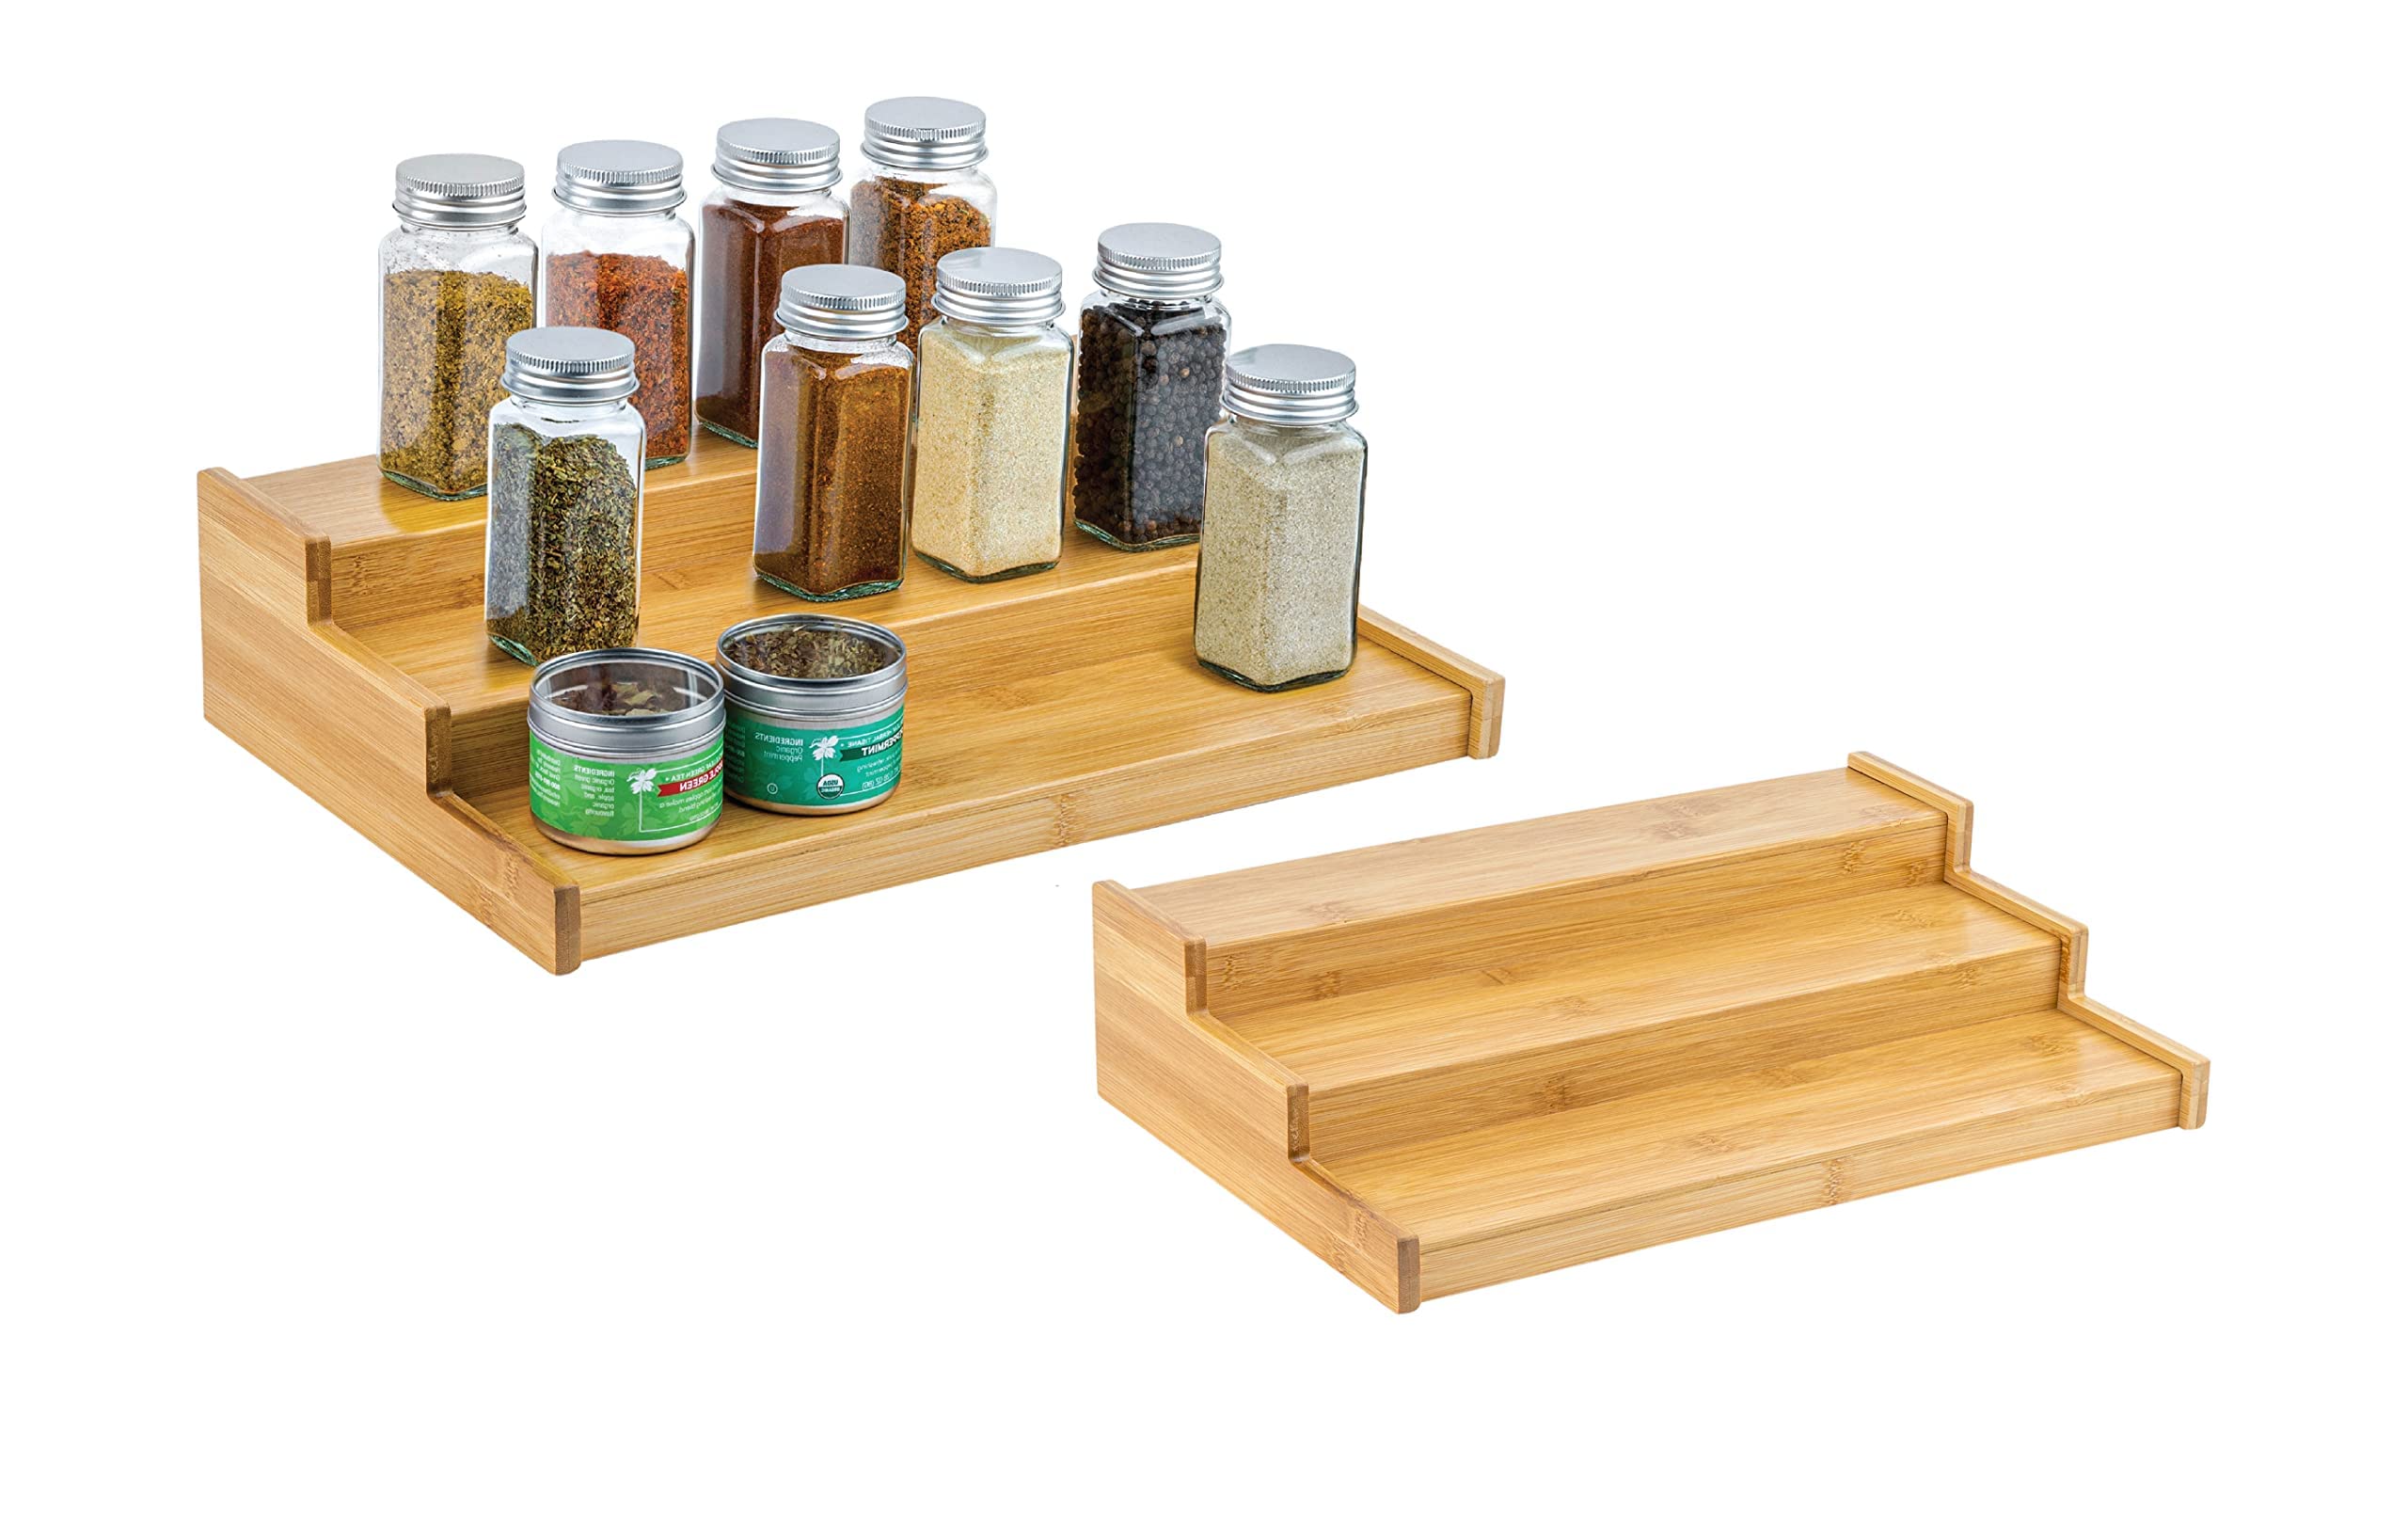 Homeries Bamboo Spice Rack organizer 3-Tier Non-Skid for Pantry Cabinet or Countertop, Waterproof, For Spice Bottles, Jars, Seasonings, Baking Supplies (2 Pack)  - Very Good